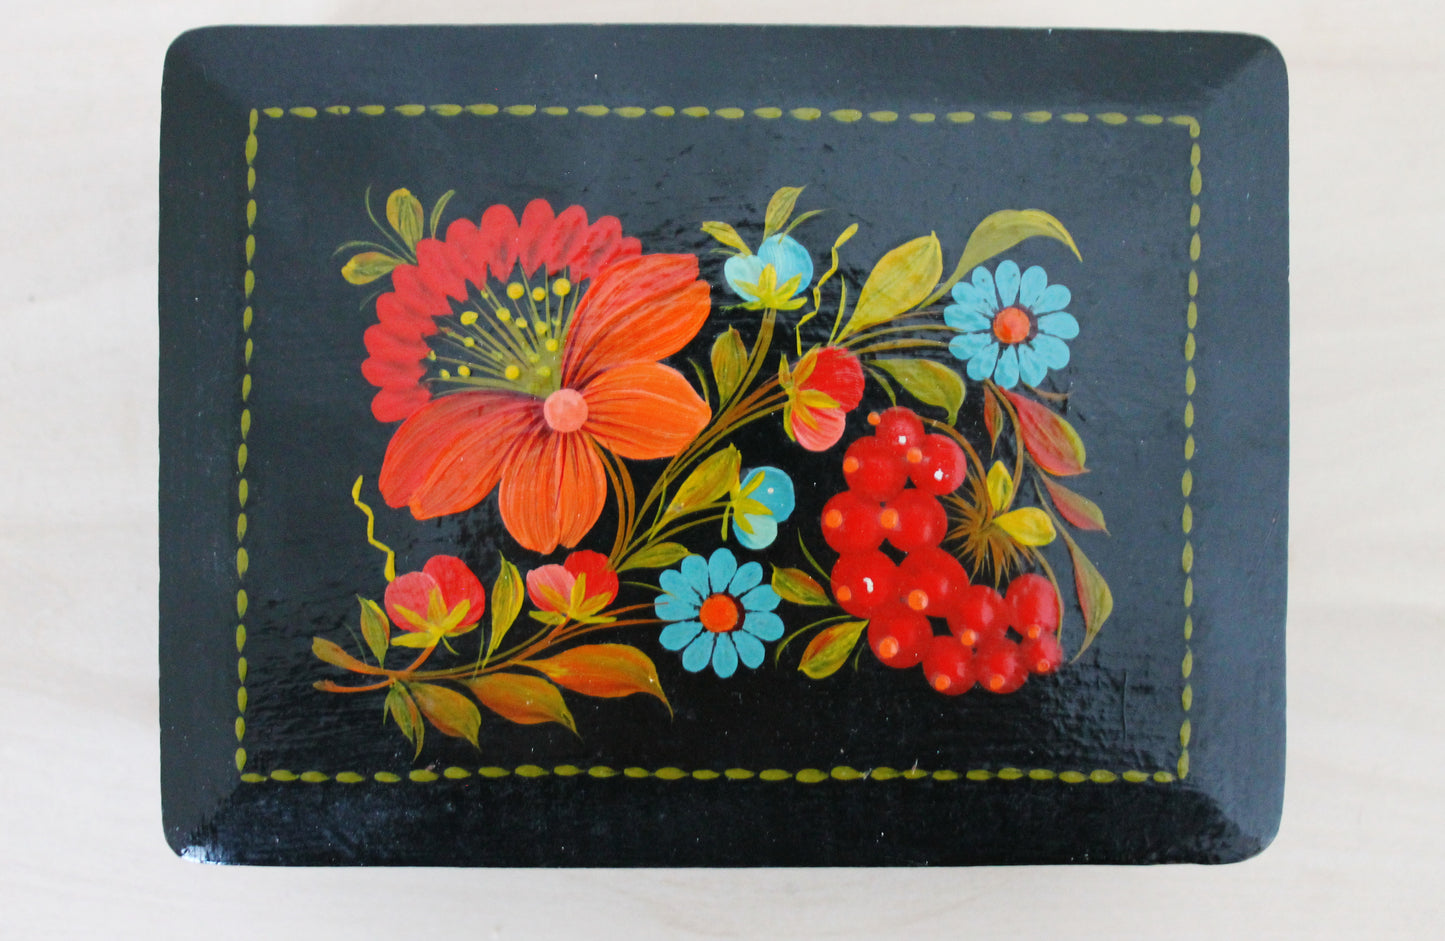 Vintage jewelry wooden box - Petrykivka box - 6.1 inches - USSR vintage - vintage flower box - made in Ukraine